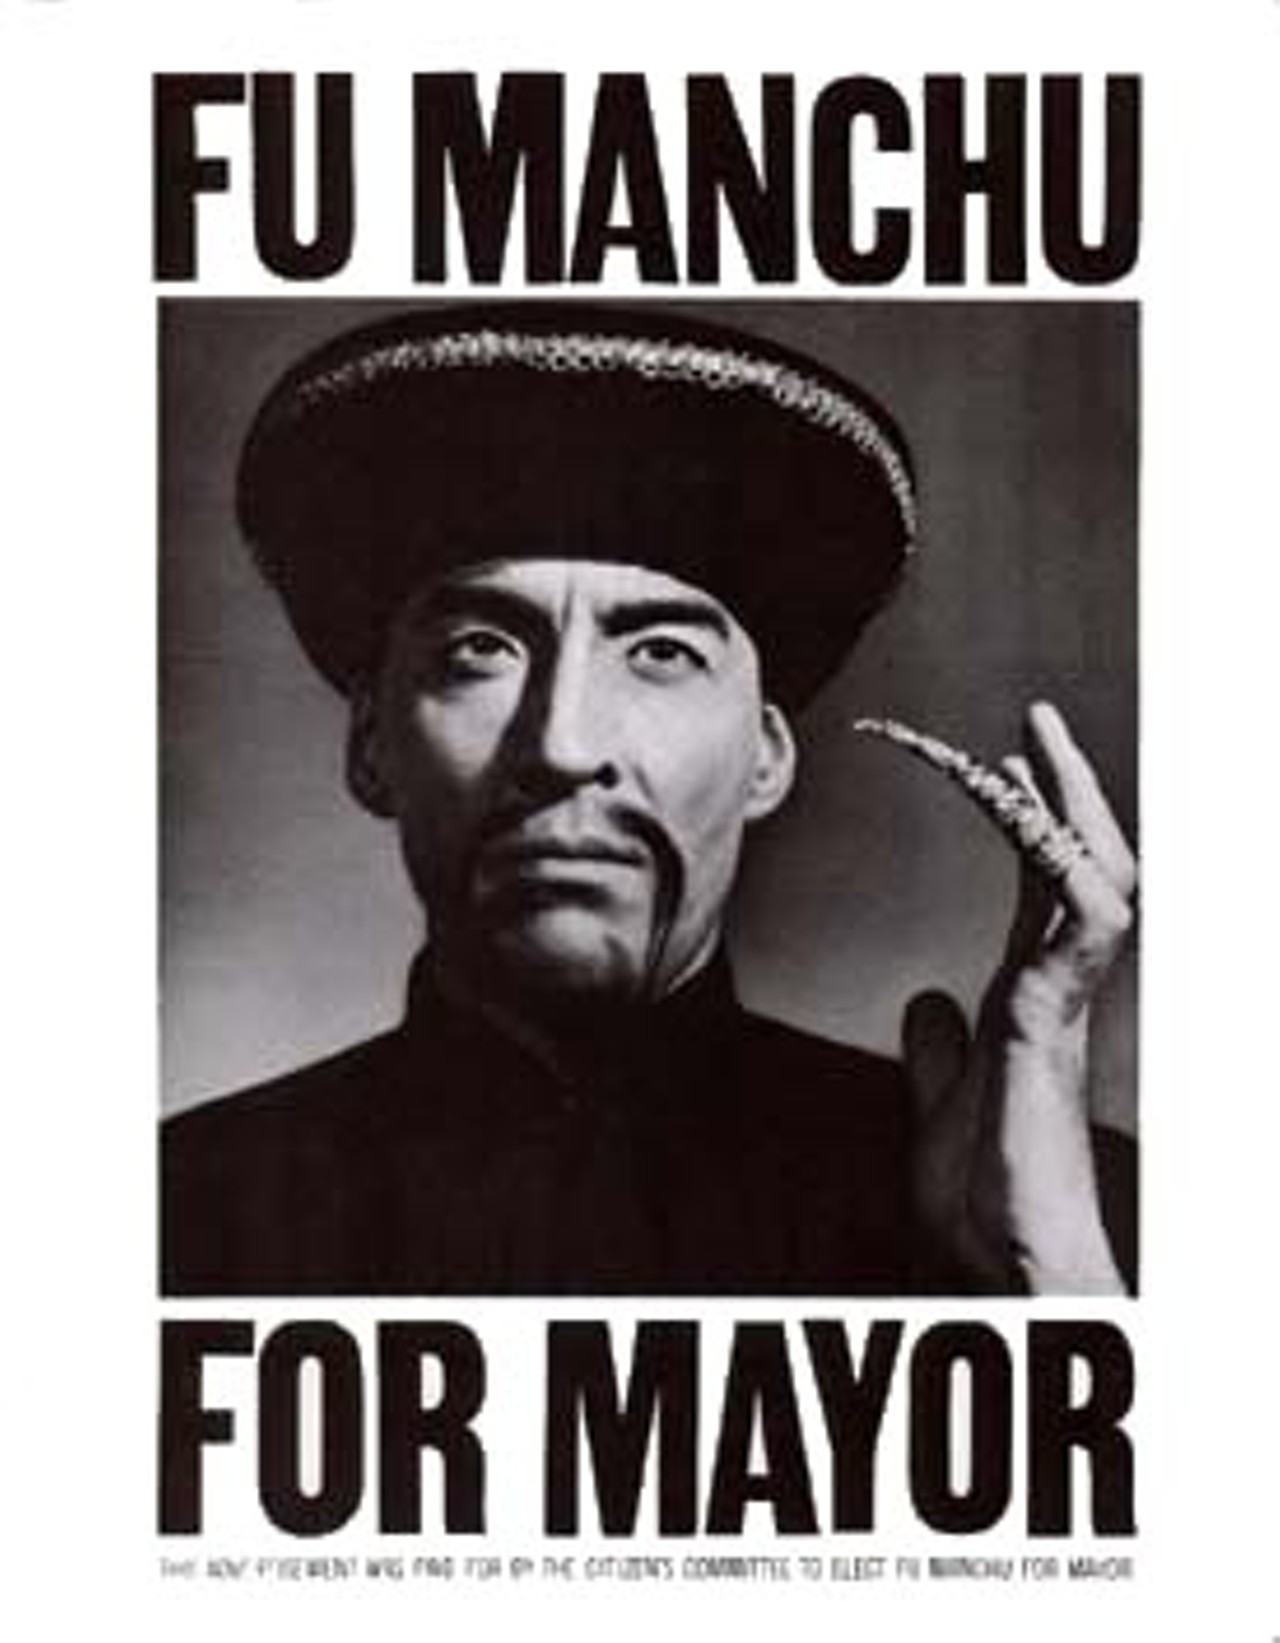 The fictional character Fu Manchu popularized the name of the 'stache style.